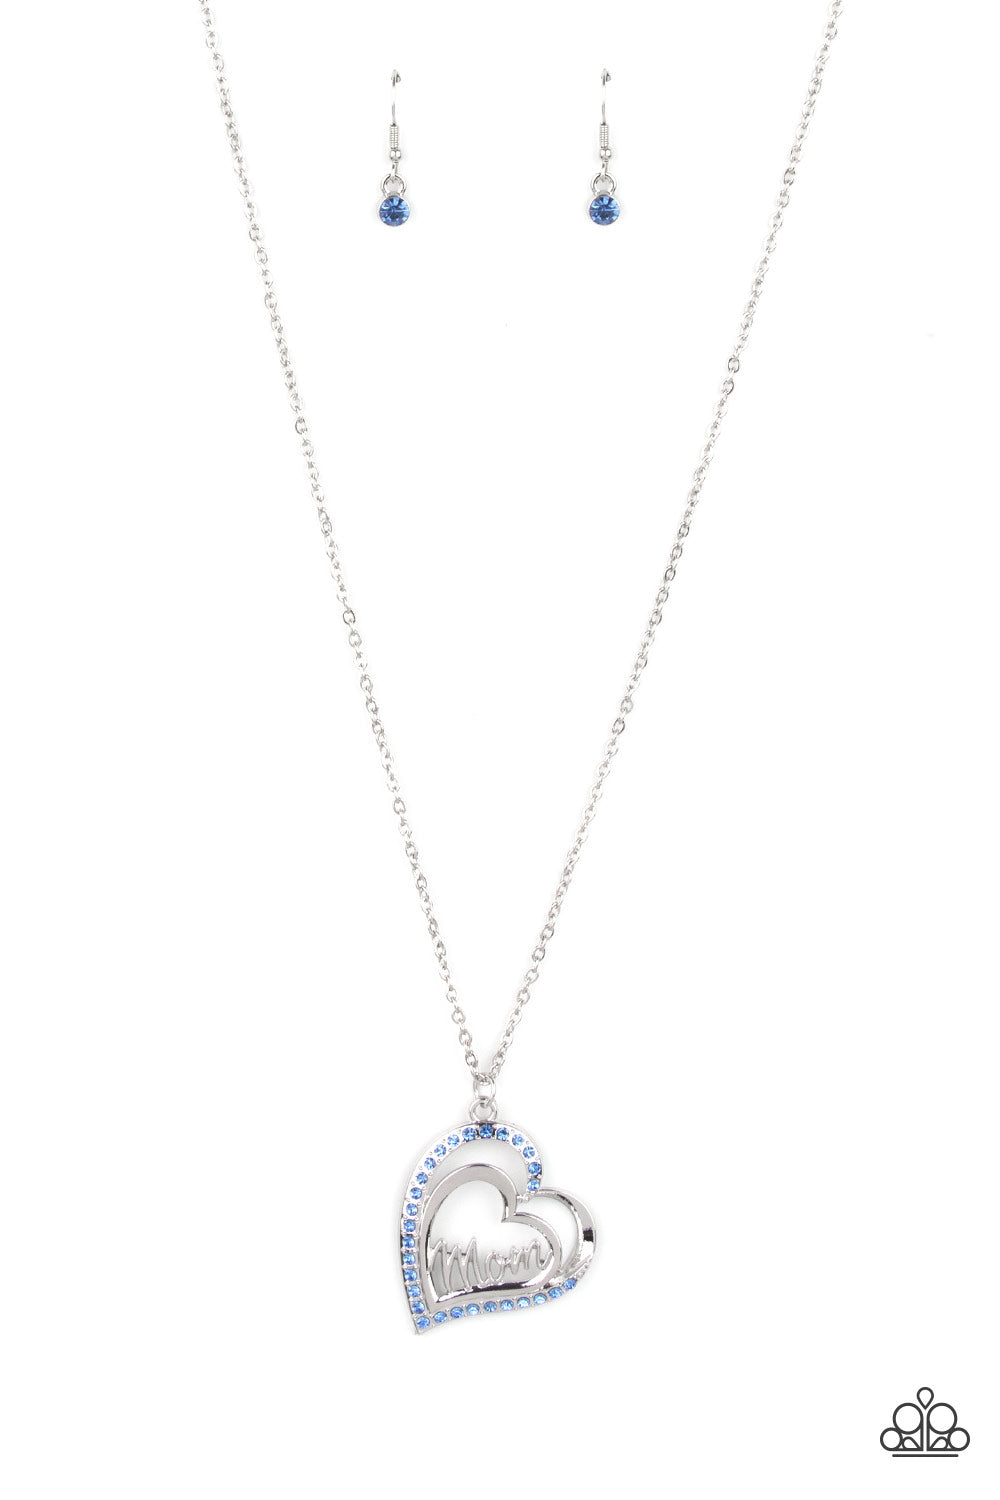 Paparazzi Accessories A Mother's Heart - Blue Necklaces - Lady T Accessories